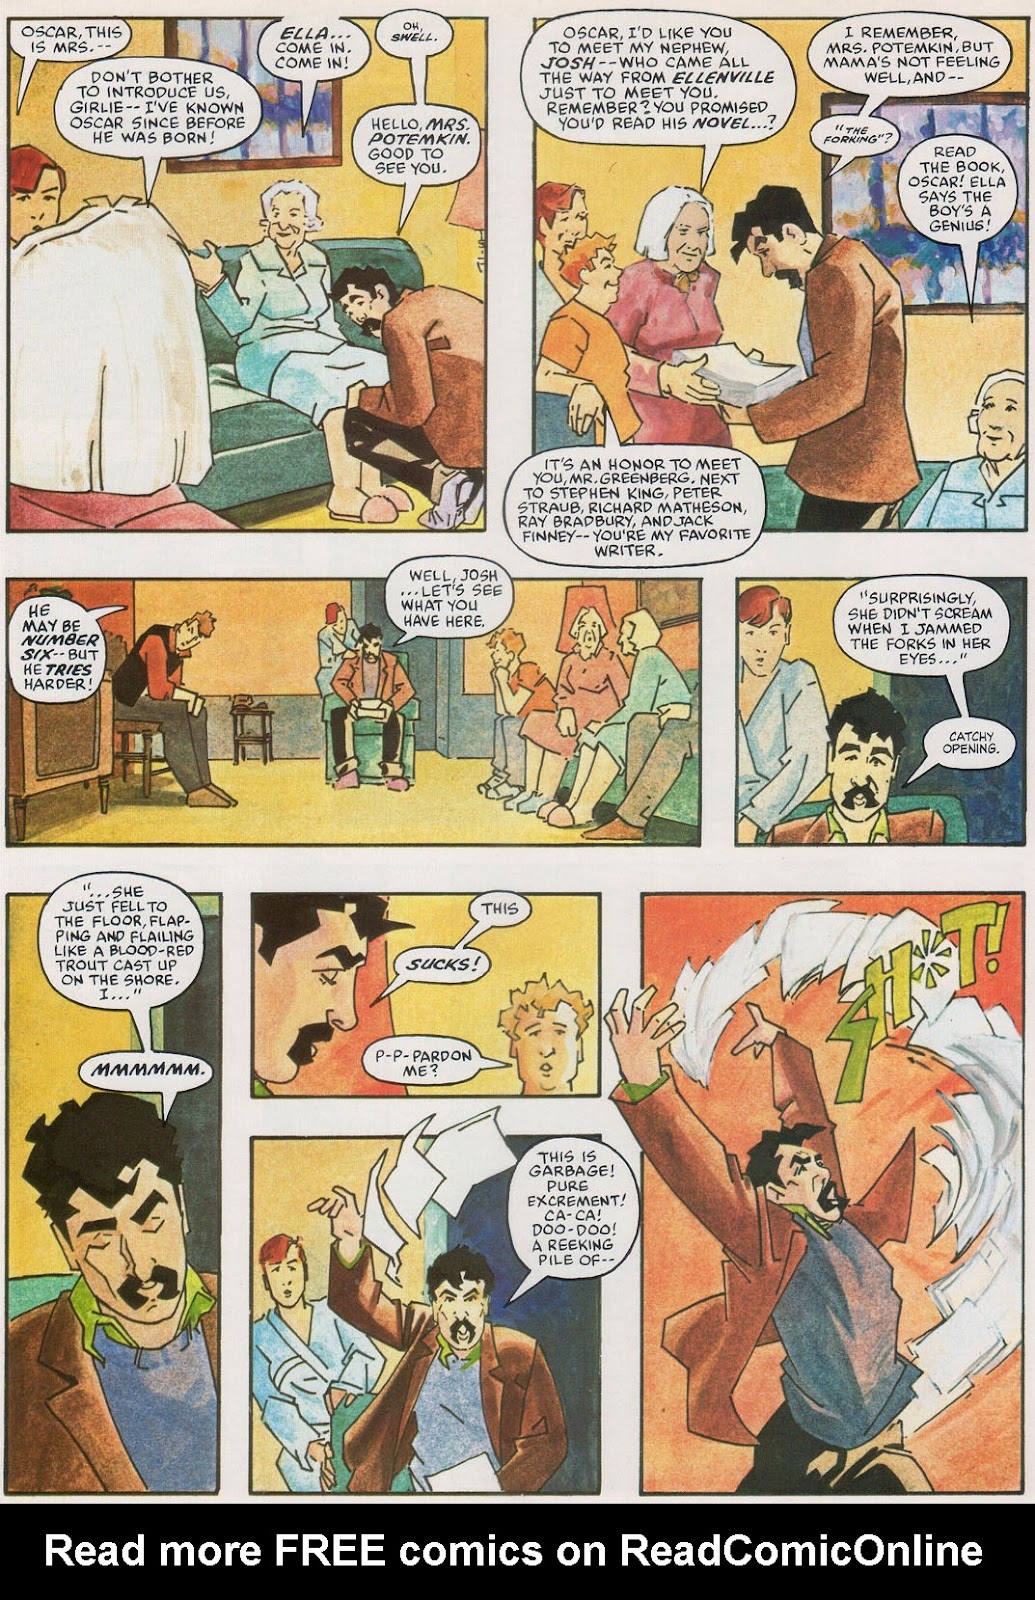 Marvel Graphic Novel issue 20 - Greenberg the Vampire - Page 20